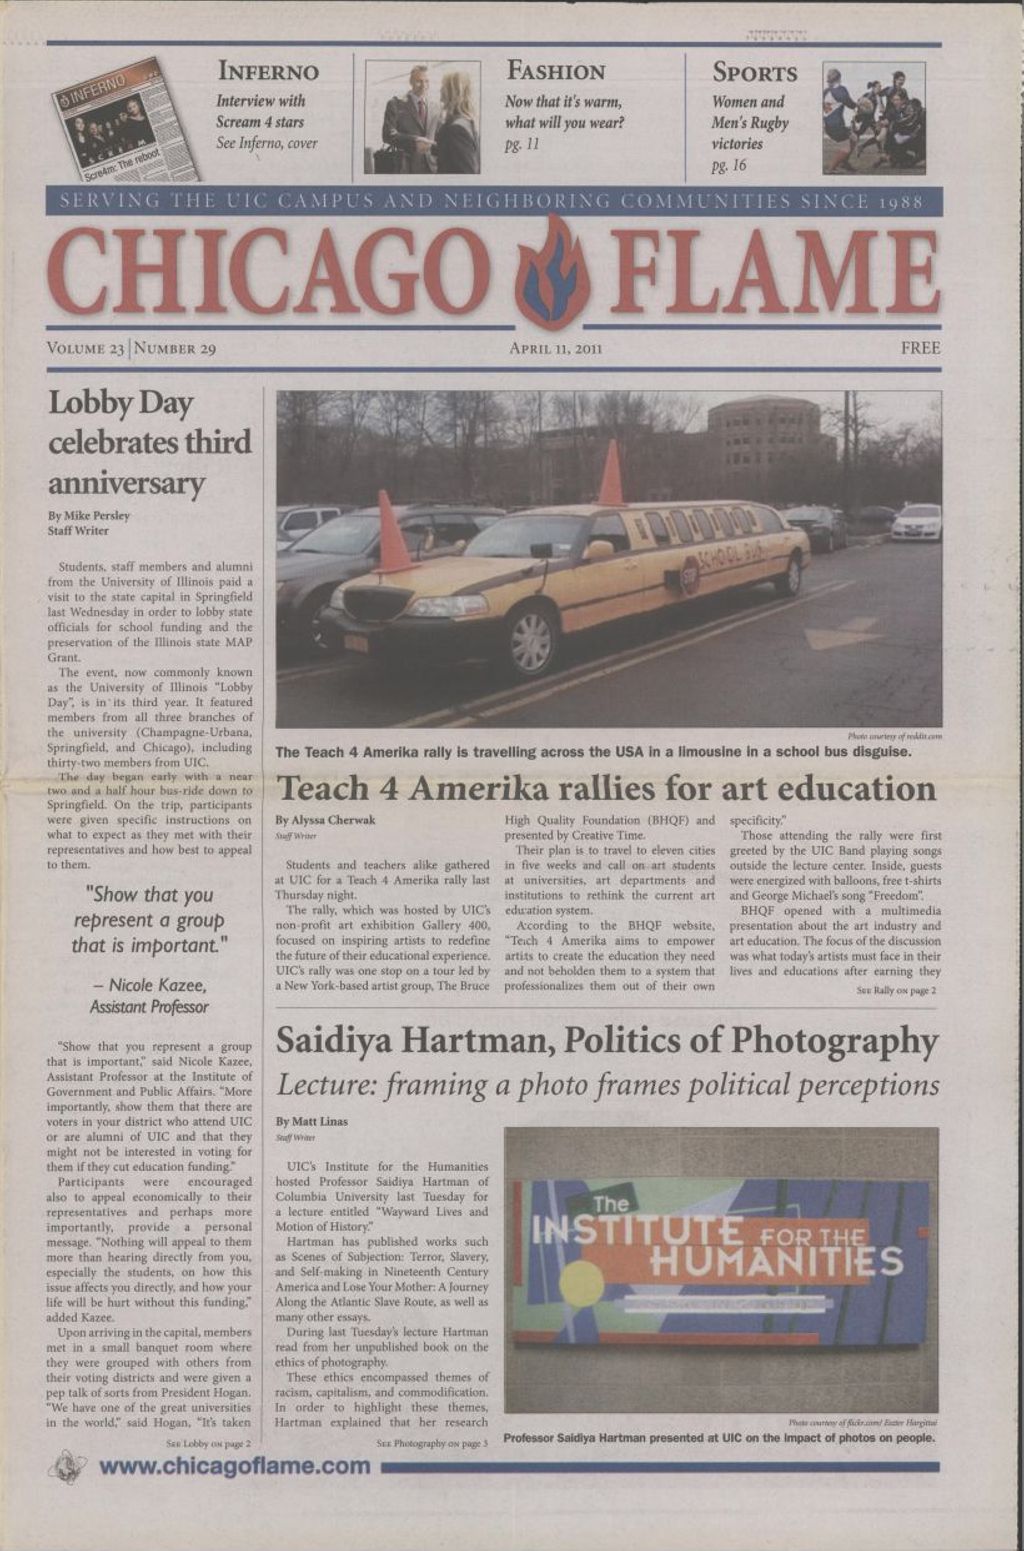 Miniature of Chicago Flame (April 11, 2011)